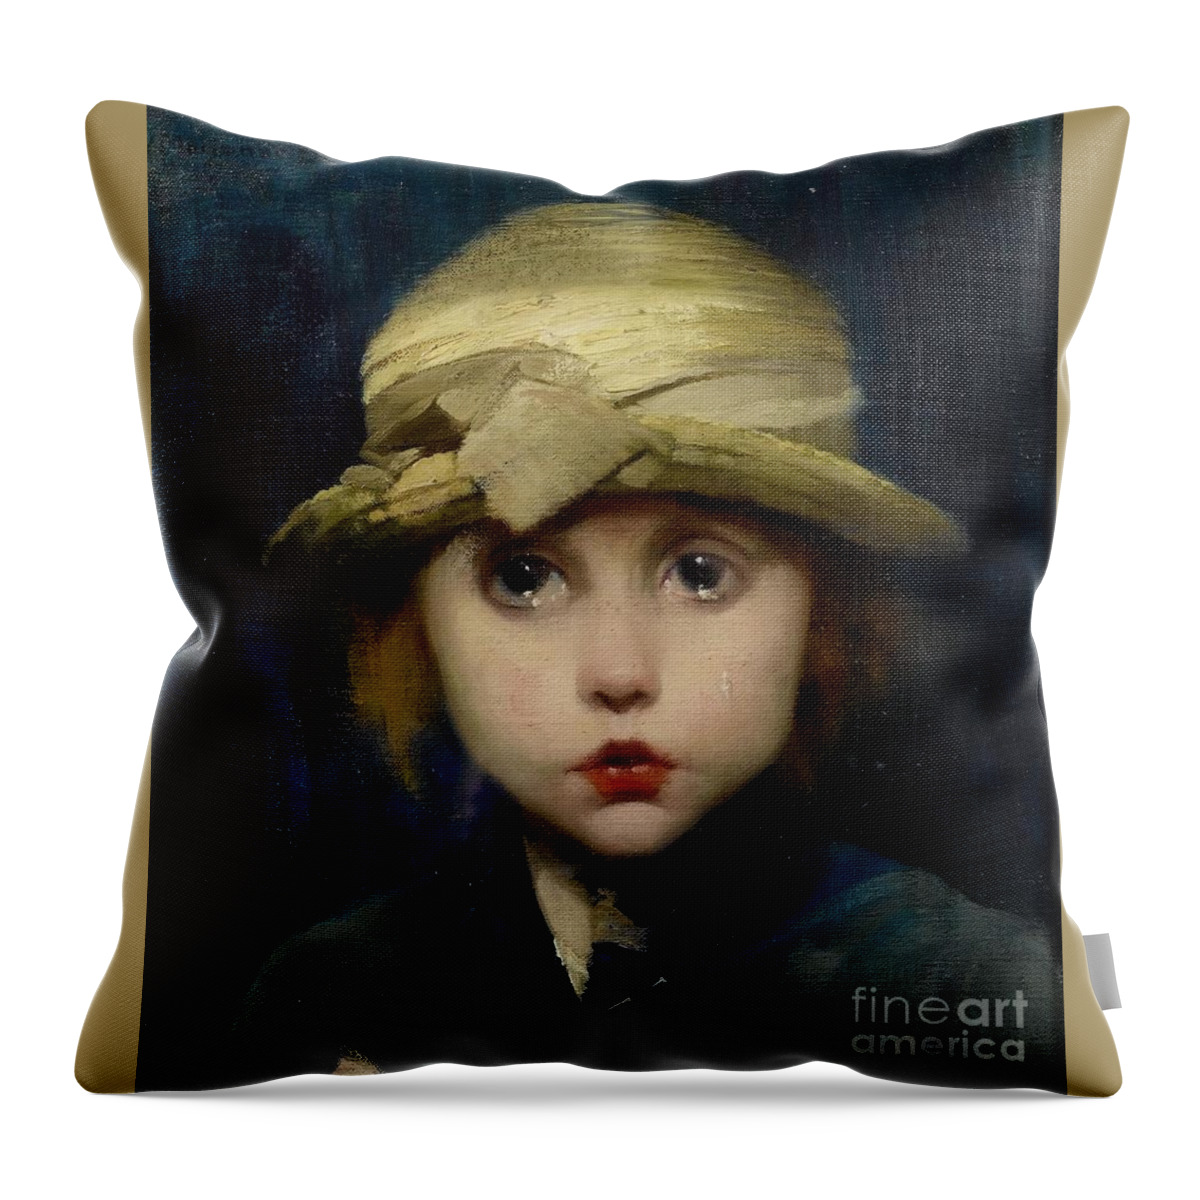 Marianne Stokes - A Tearful Child. Little Girl Throw Pillow featuring the painting A Tearful Child by MotionAge Designs